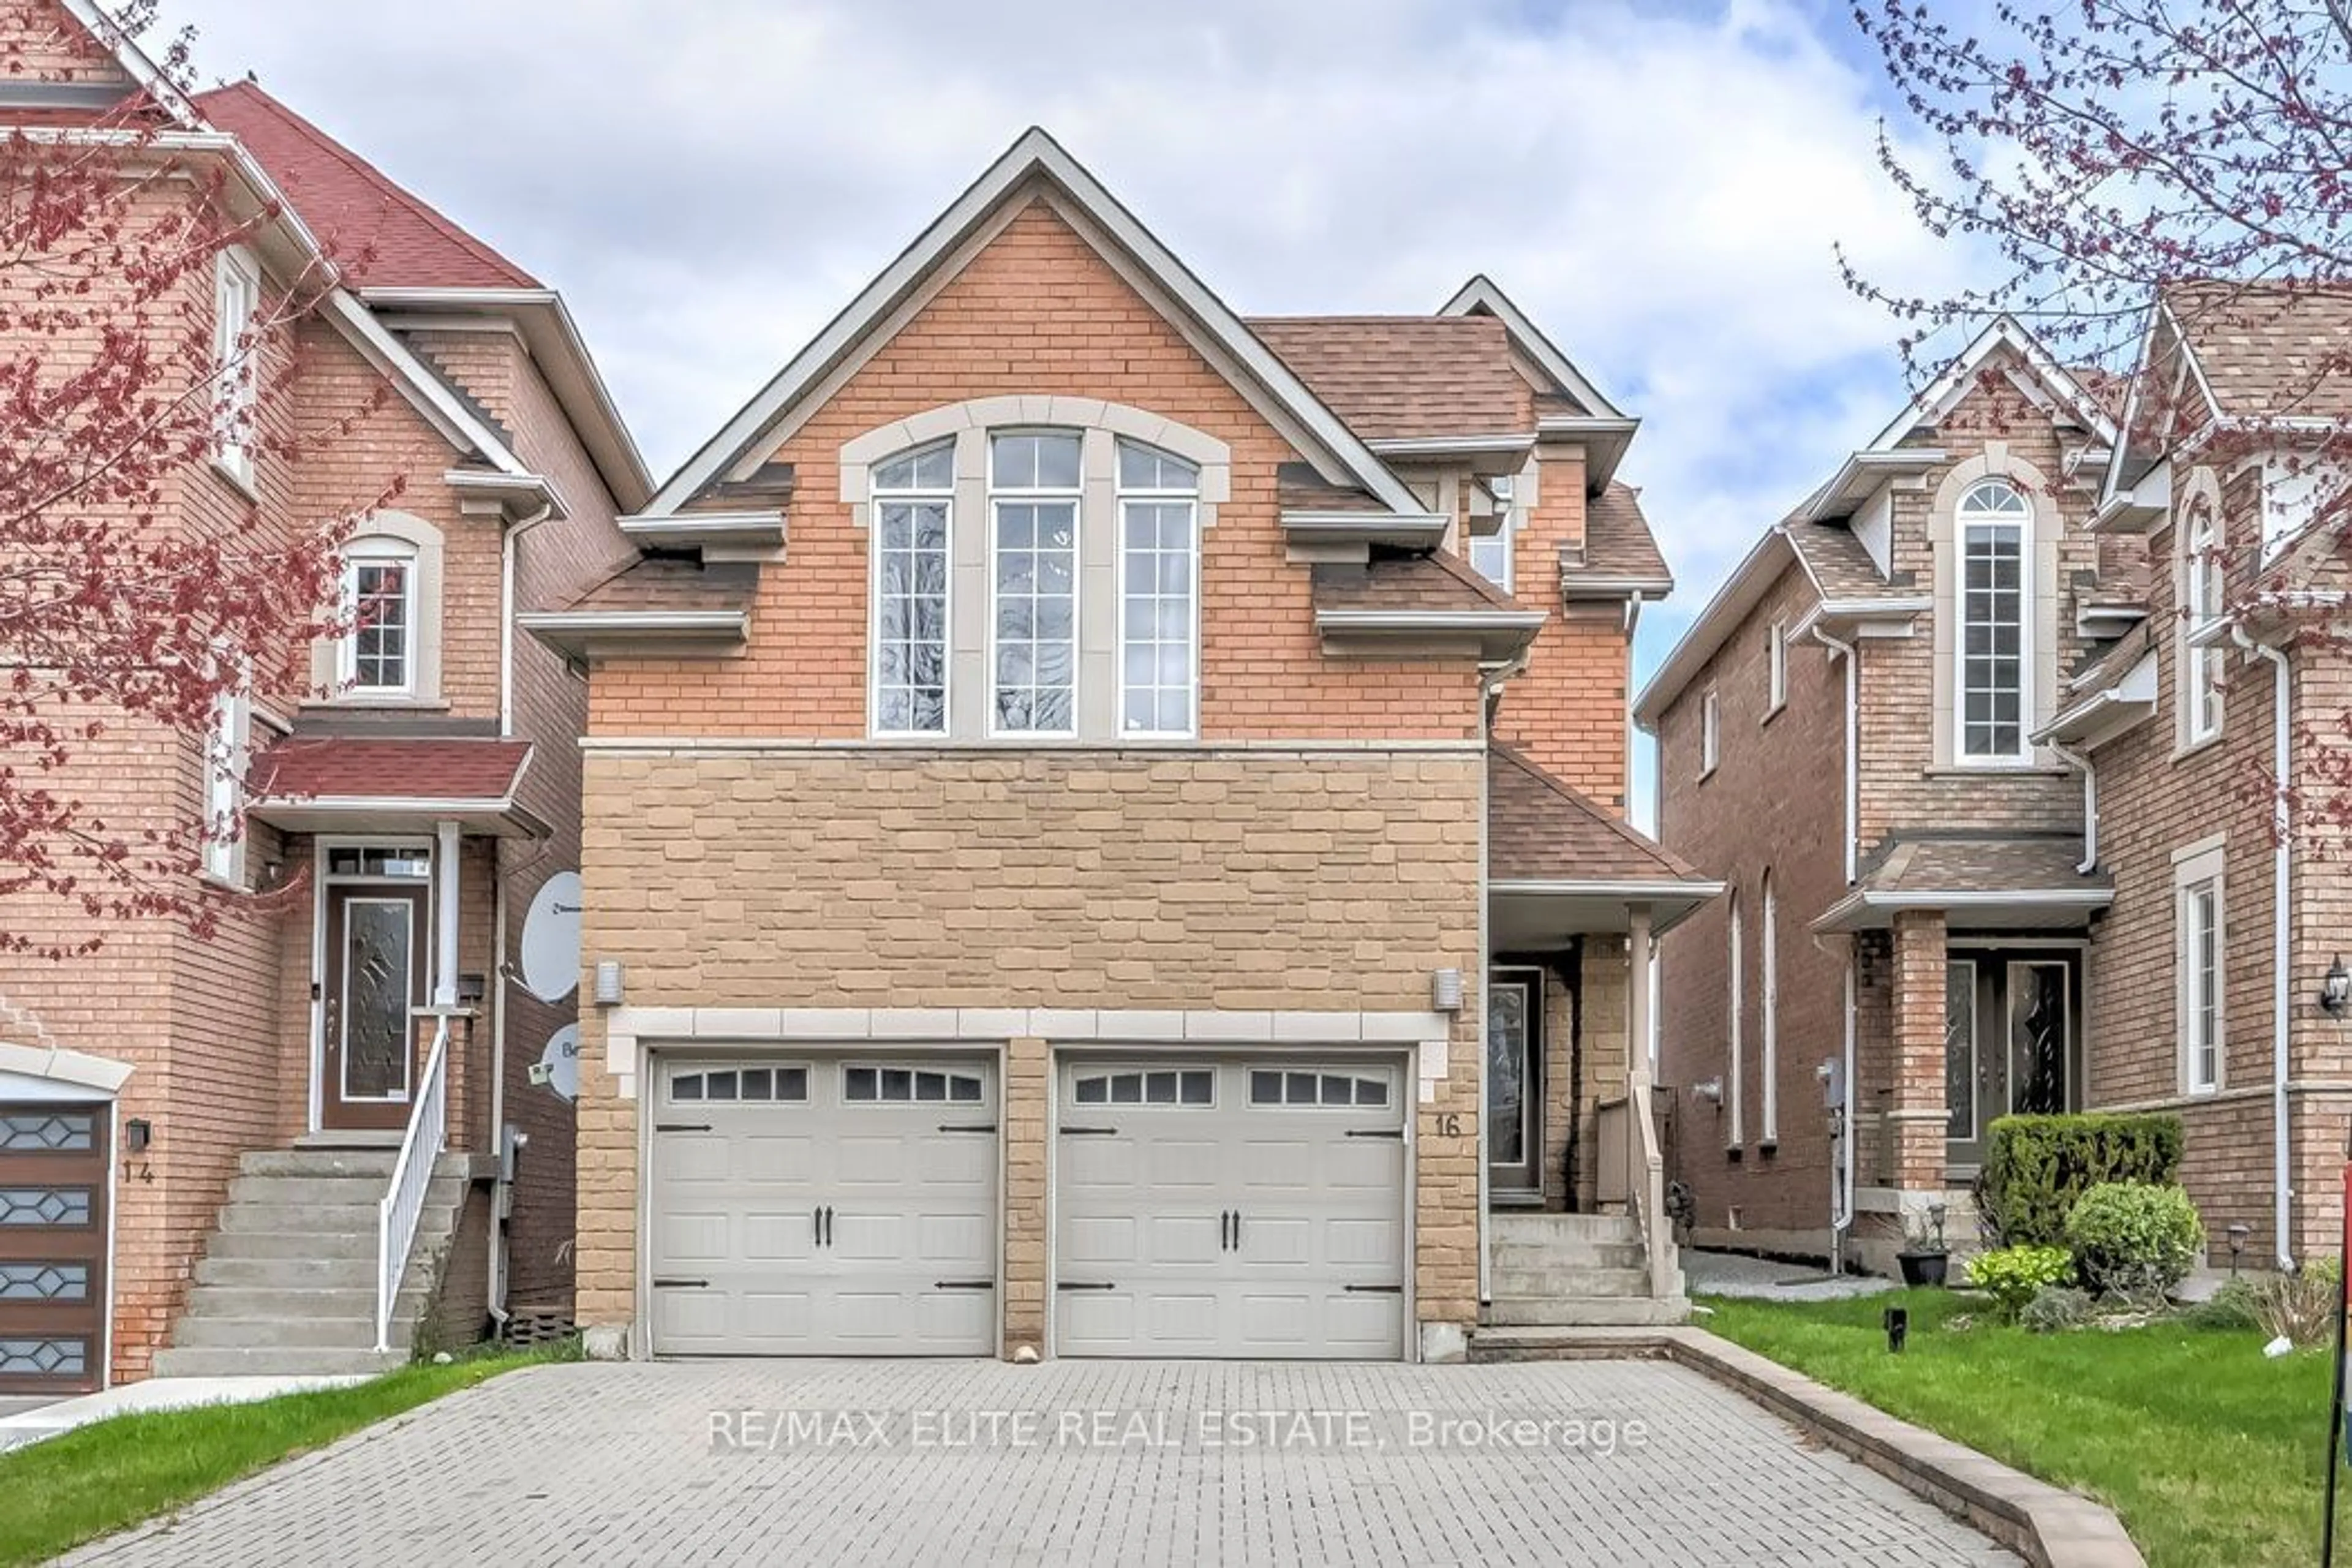 Home with brick exterior material for 16 Futura Ave, Richmond Hill Ontario L4S 1V2